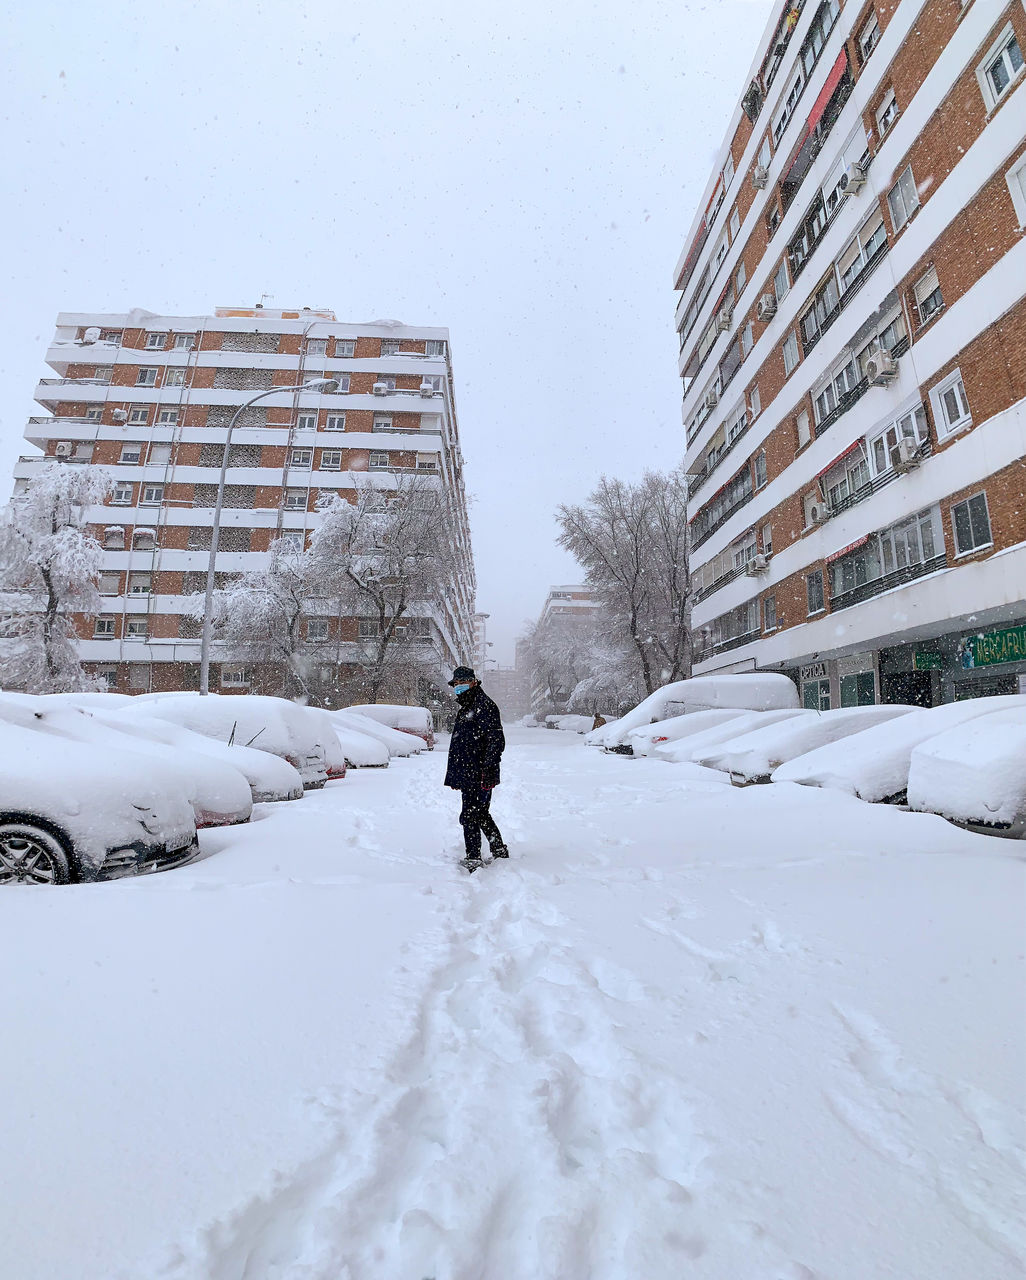 PERSON WALKING ON SNOW COVERED CITY BUILDINGS